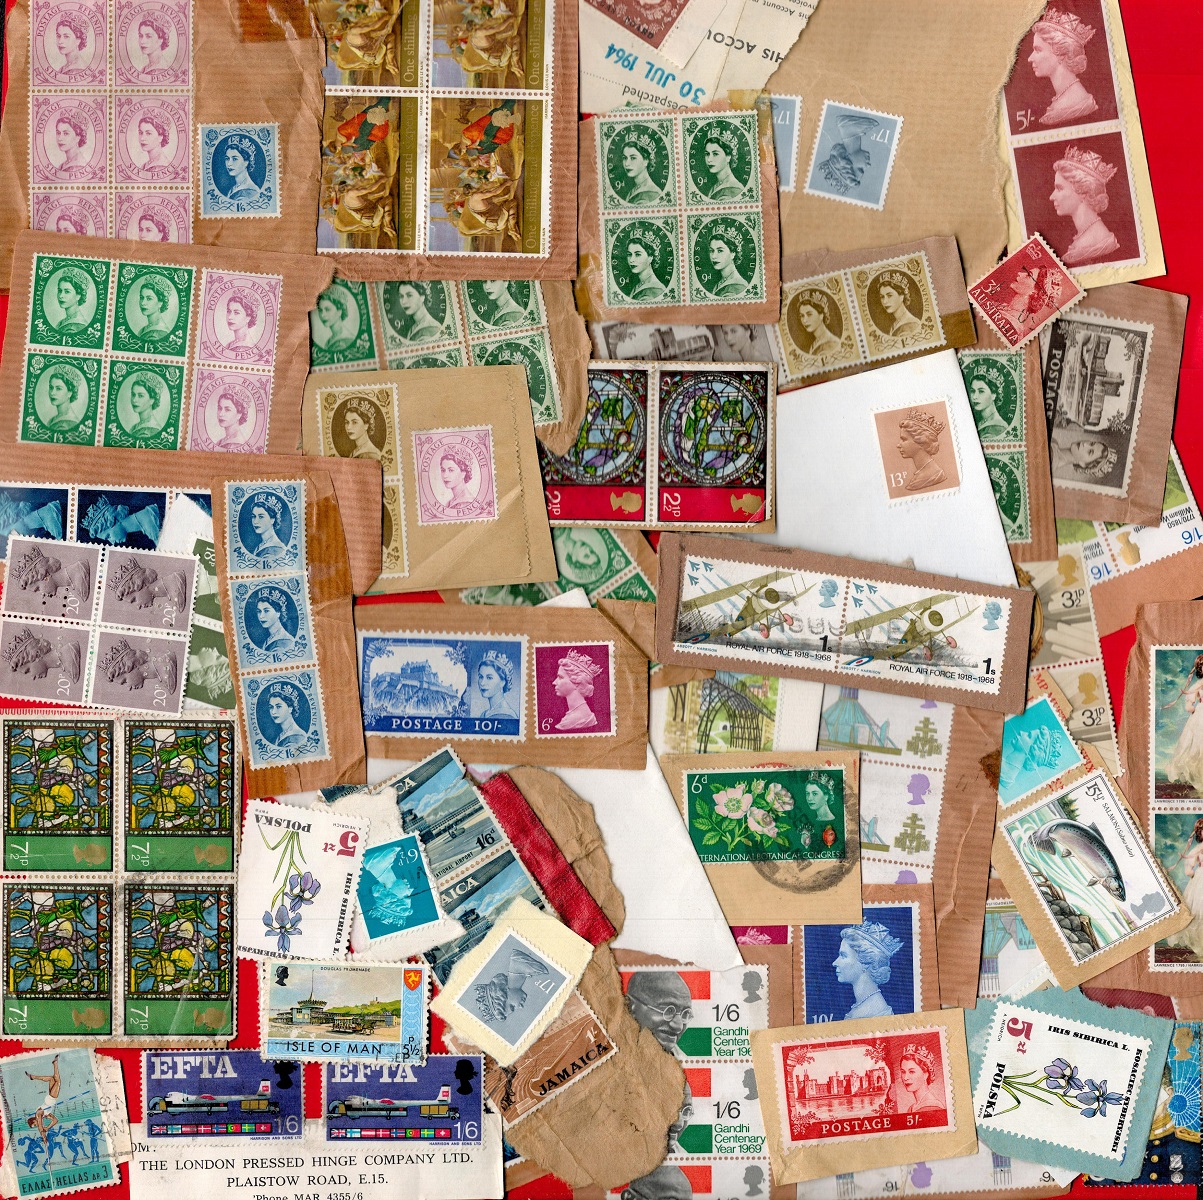 Used Stamps Predominantly GB some Worldwide, some are mint approx 200 - 300 Stamps. Good